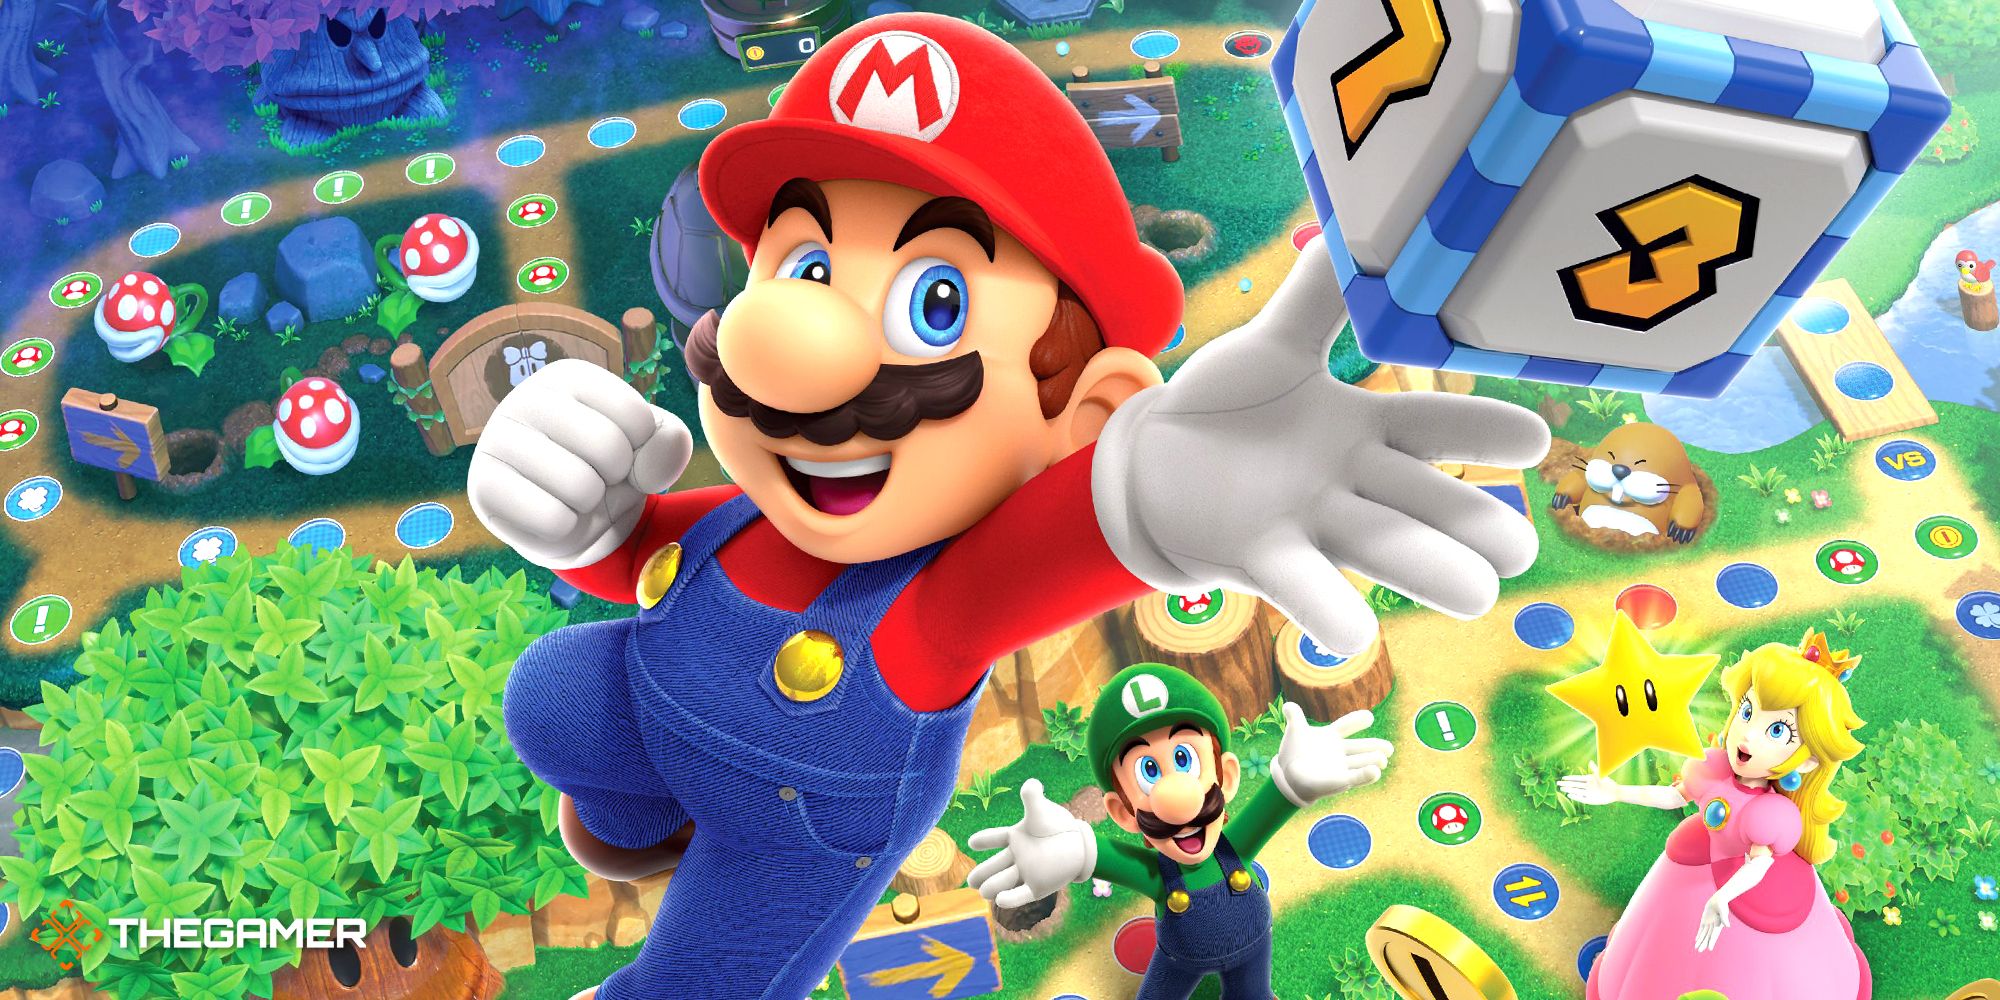 MARIO PARTY free online game on